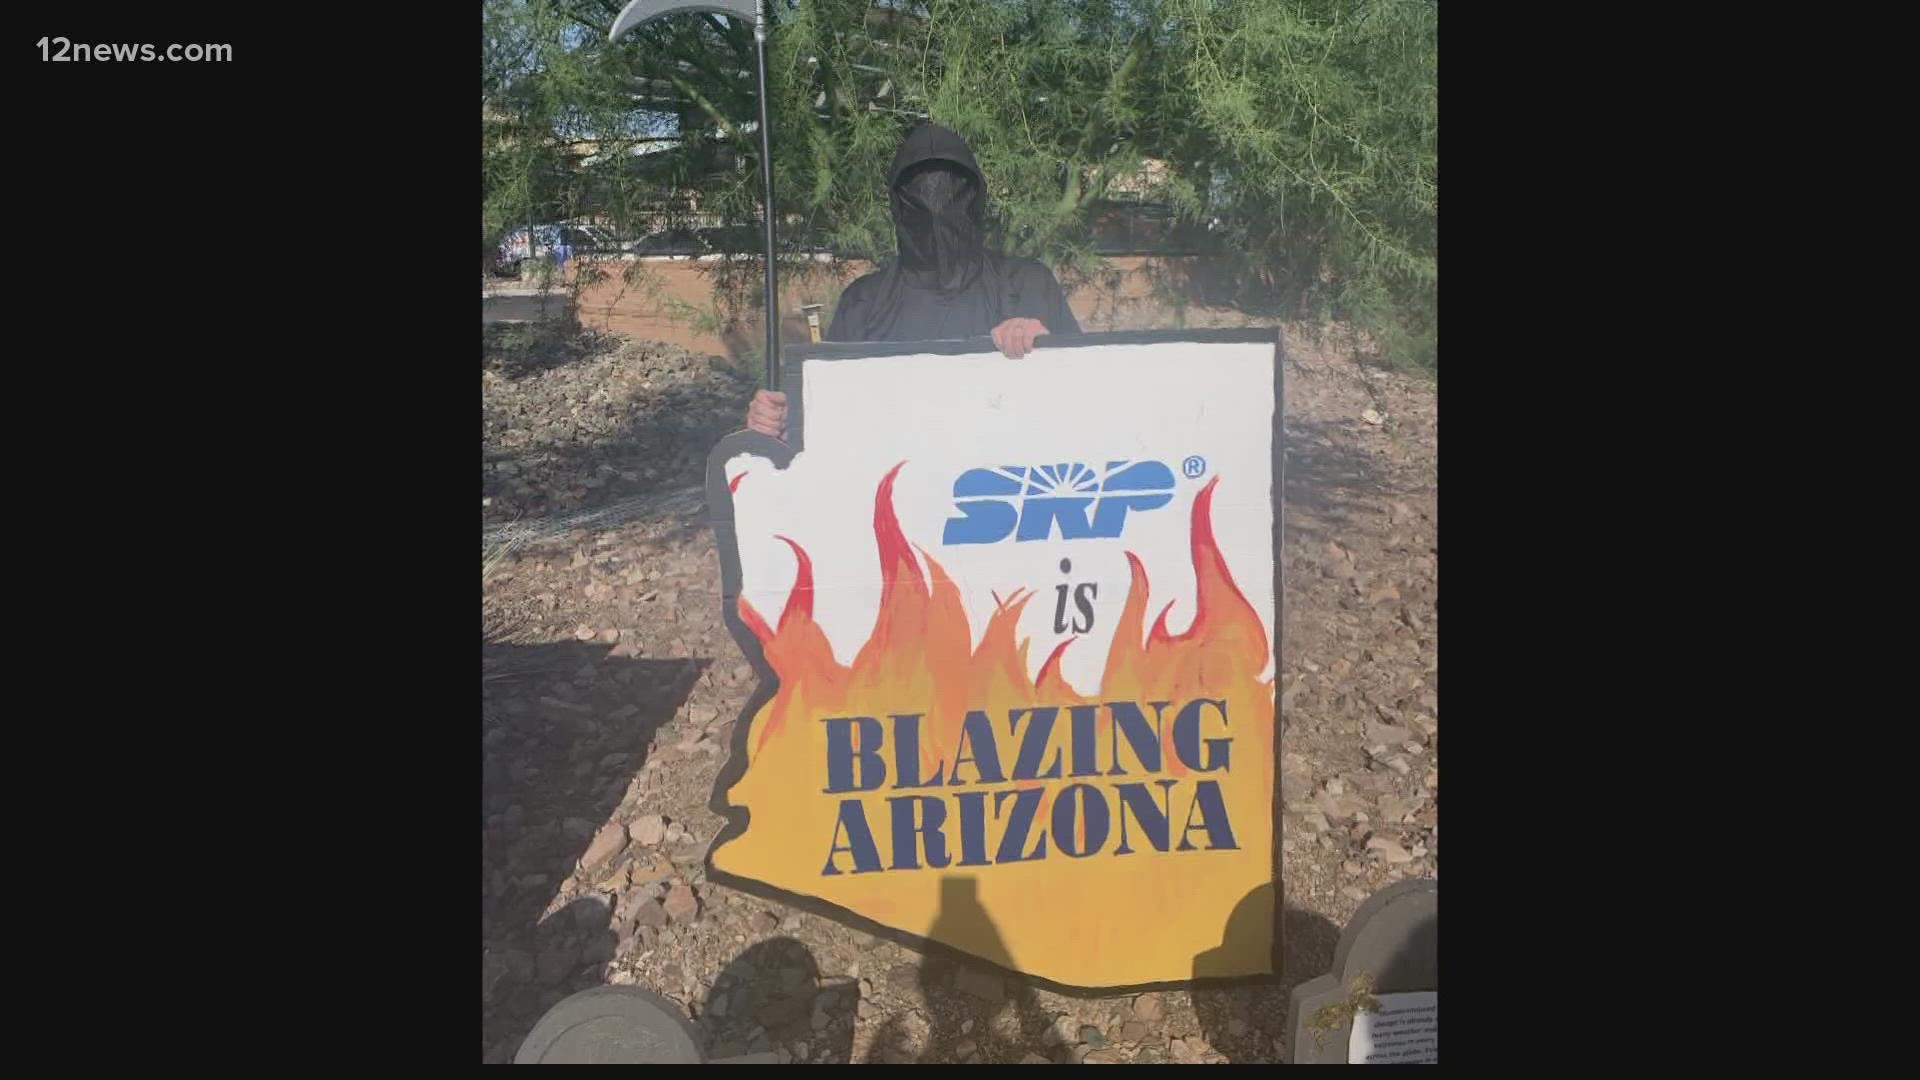 Arizona lawmakers and environmental activists took to the streets to protest the planned expansion of a massive natural gas power plant owned by SRP.